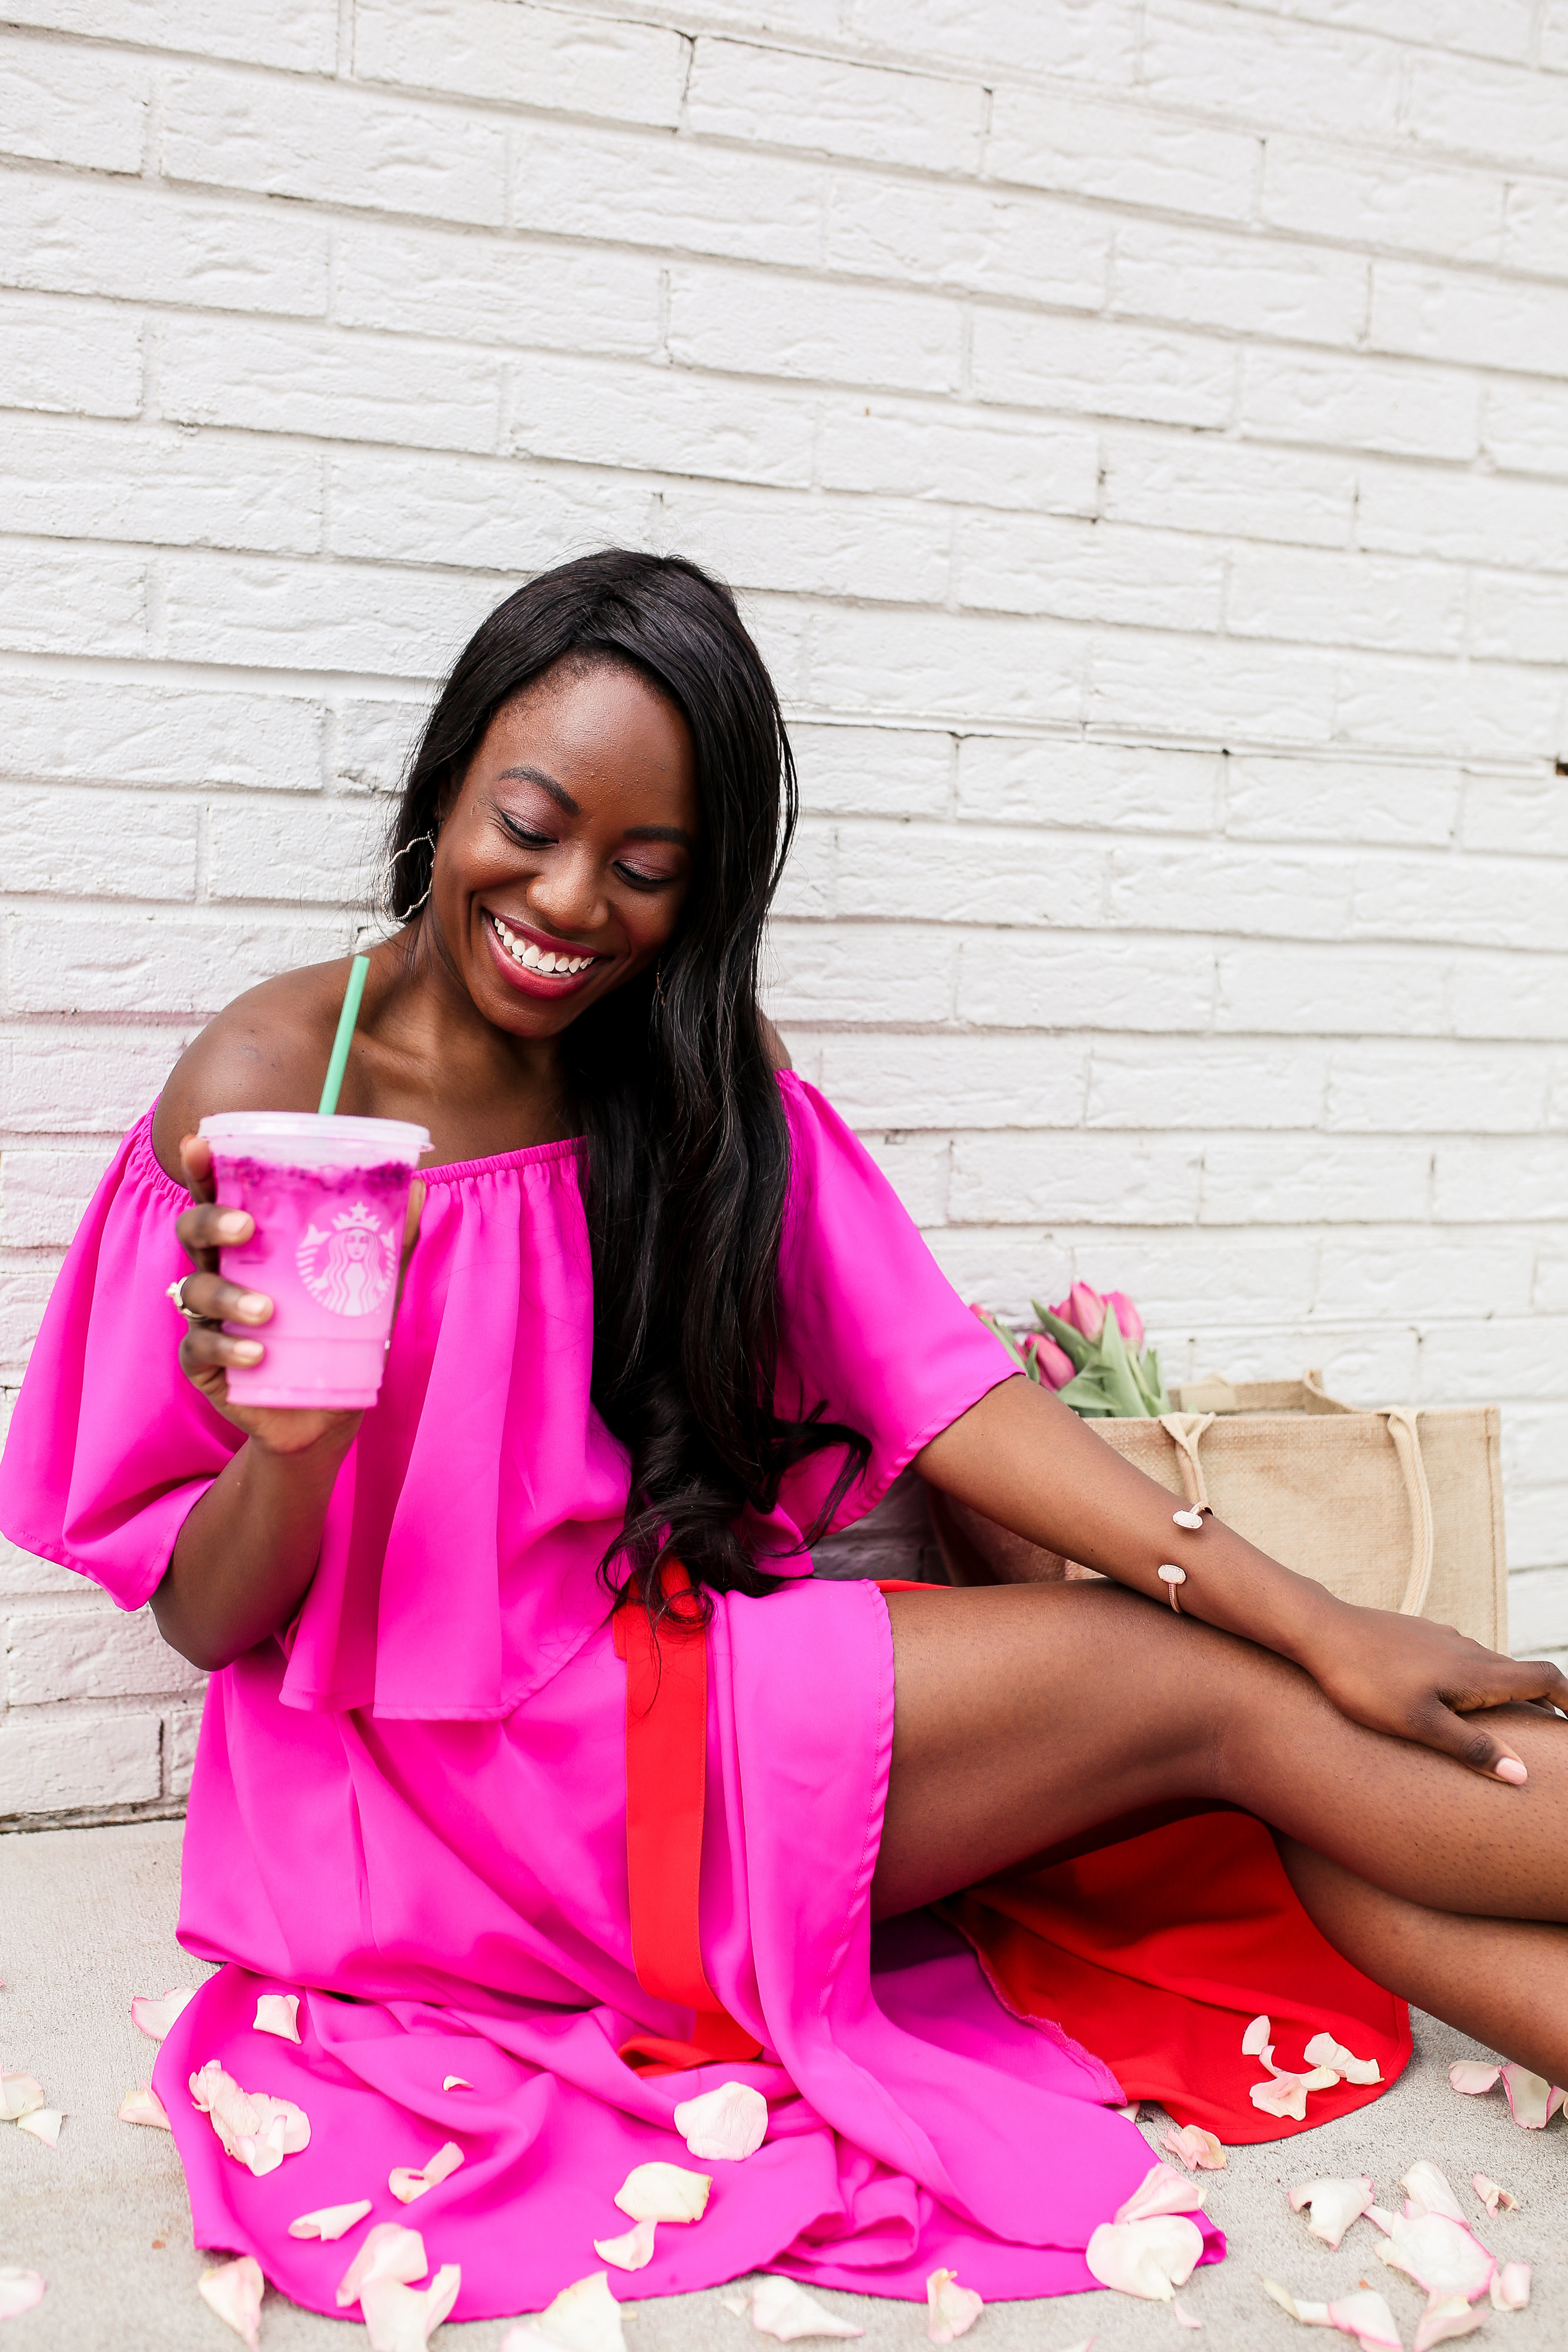 GoodTomiCha shares her latest campaign images with Starbucks' dragon drink and her favorite influencer networks on the blog